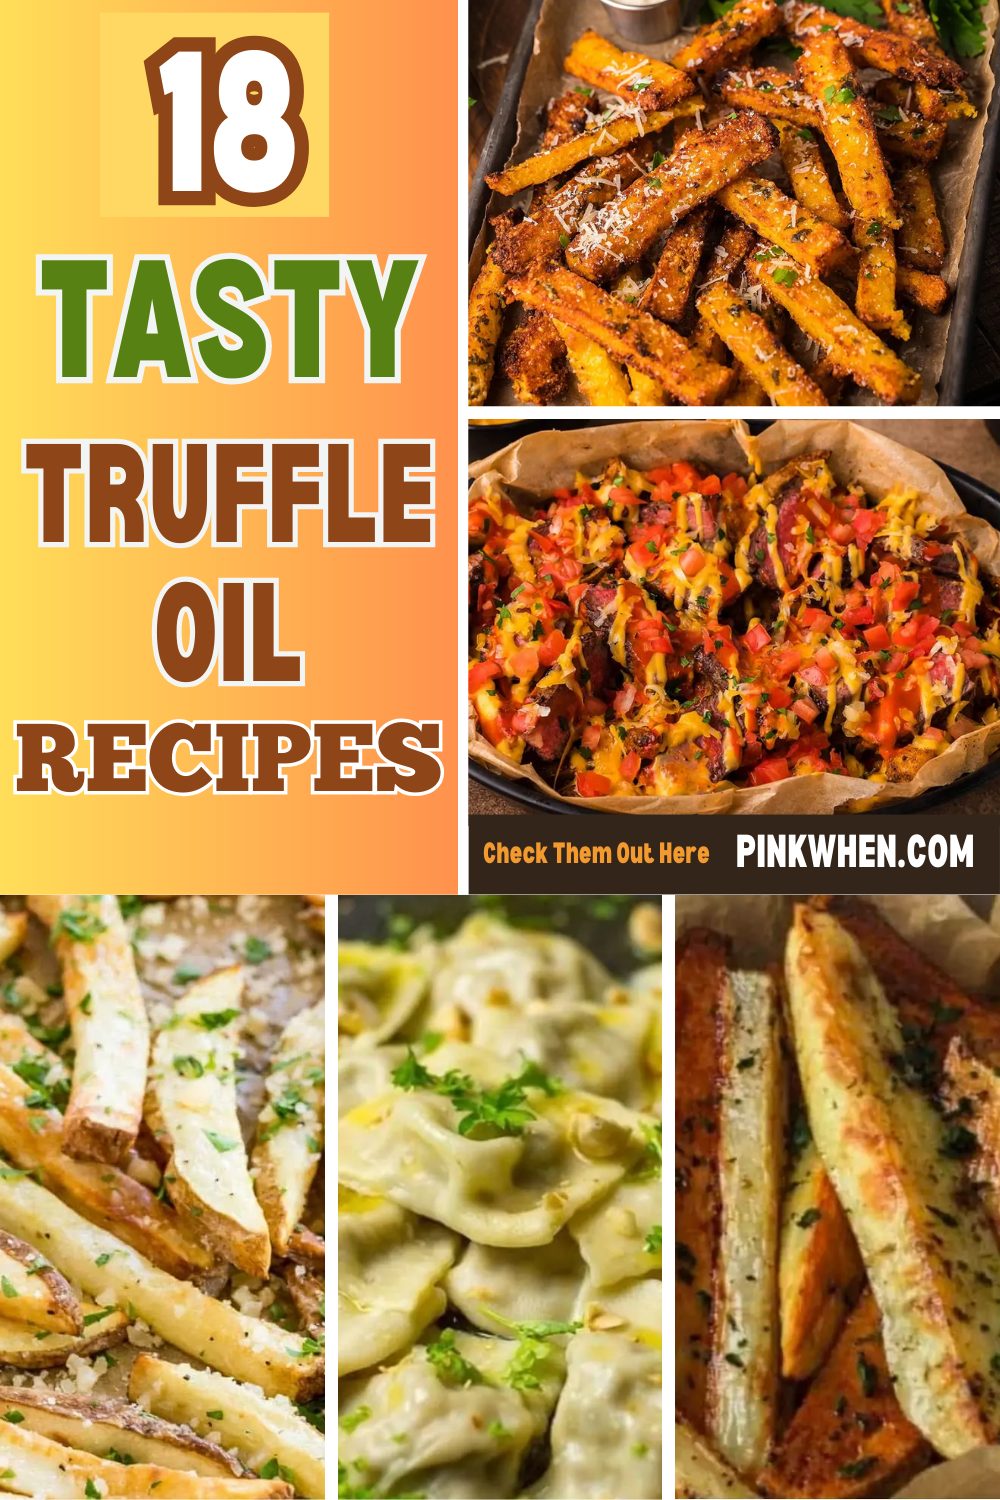 20 Tasty Truffle Recipes to Finish Dishes in Style